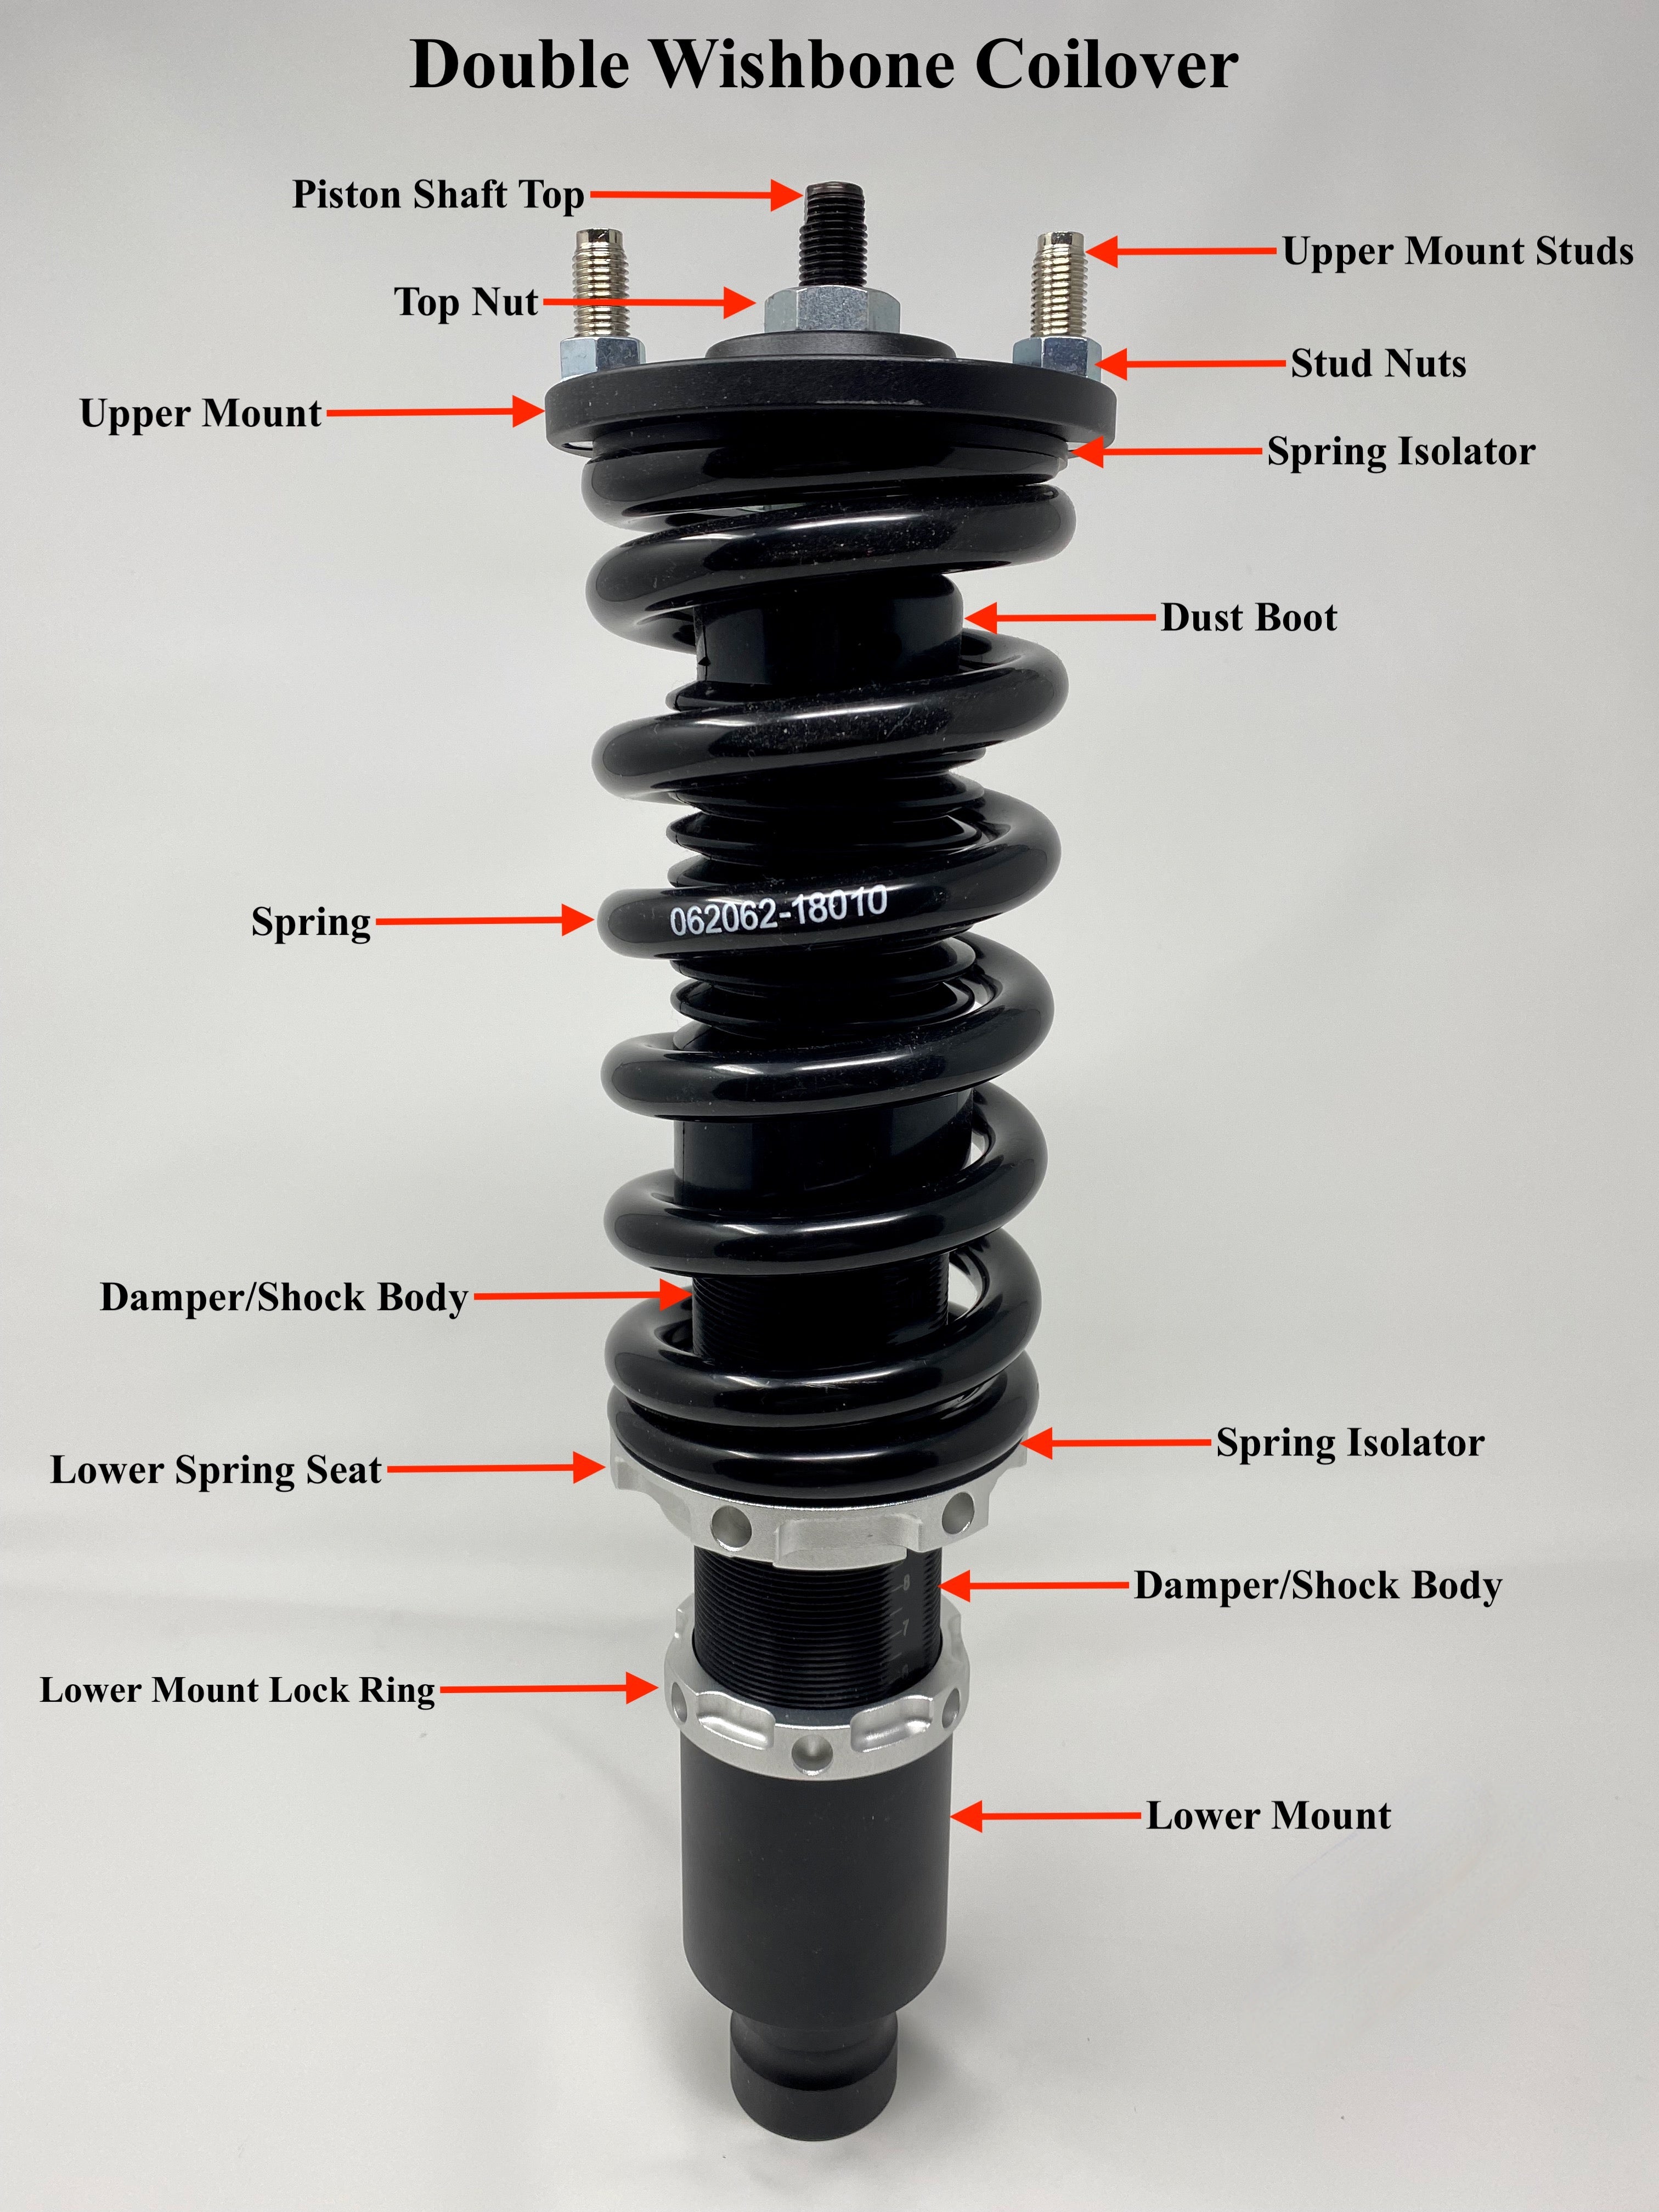 Double_Wishbone_Coilover_With_Labels.jpg